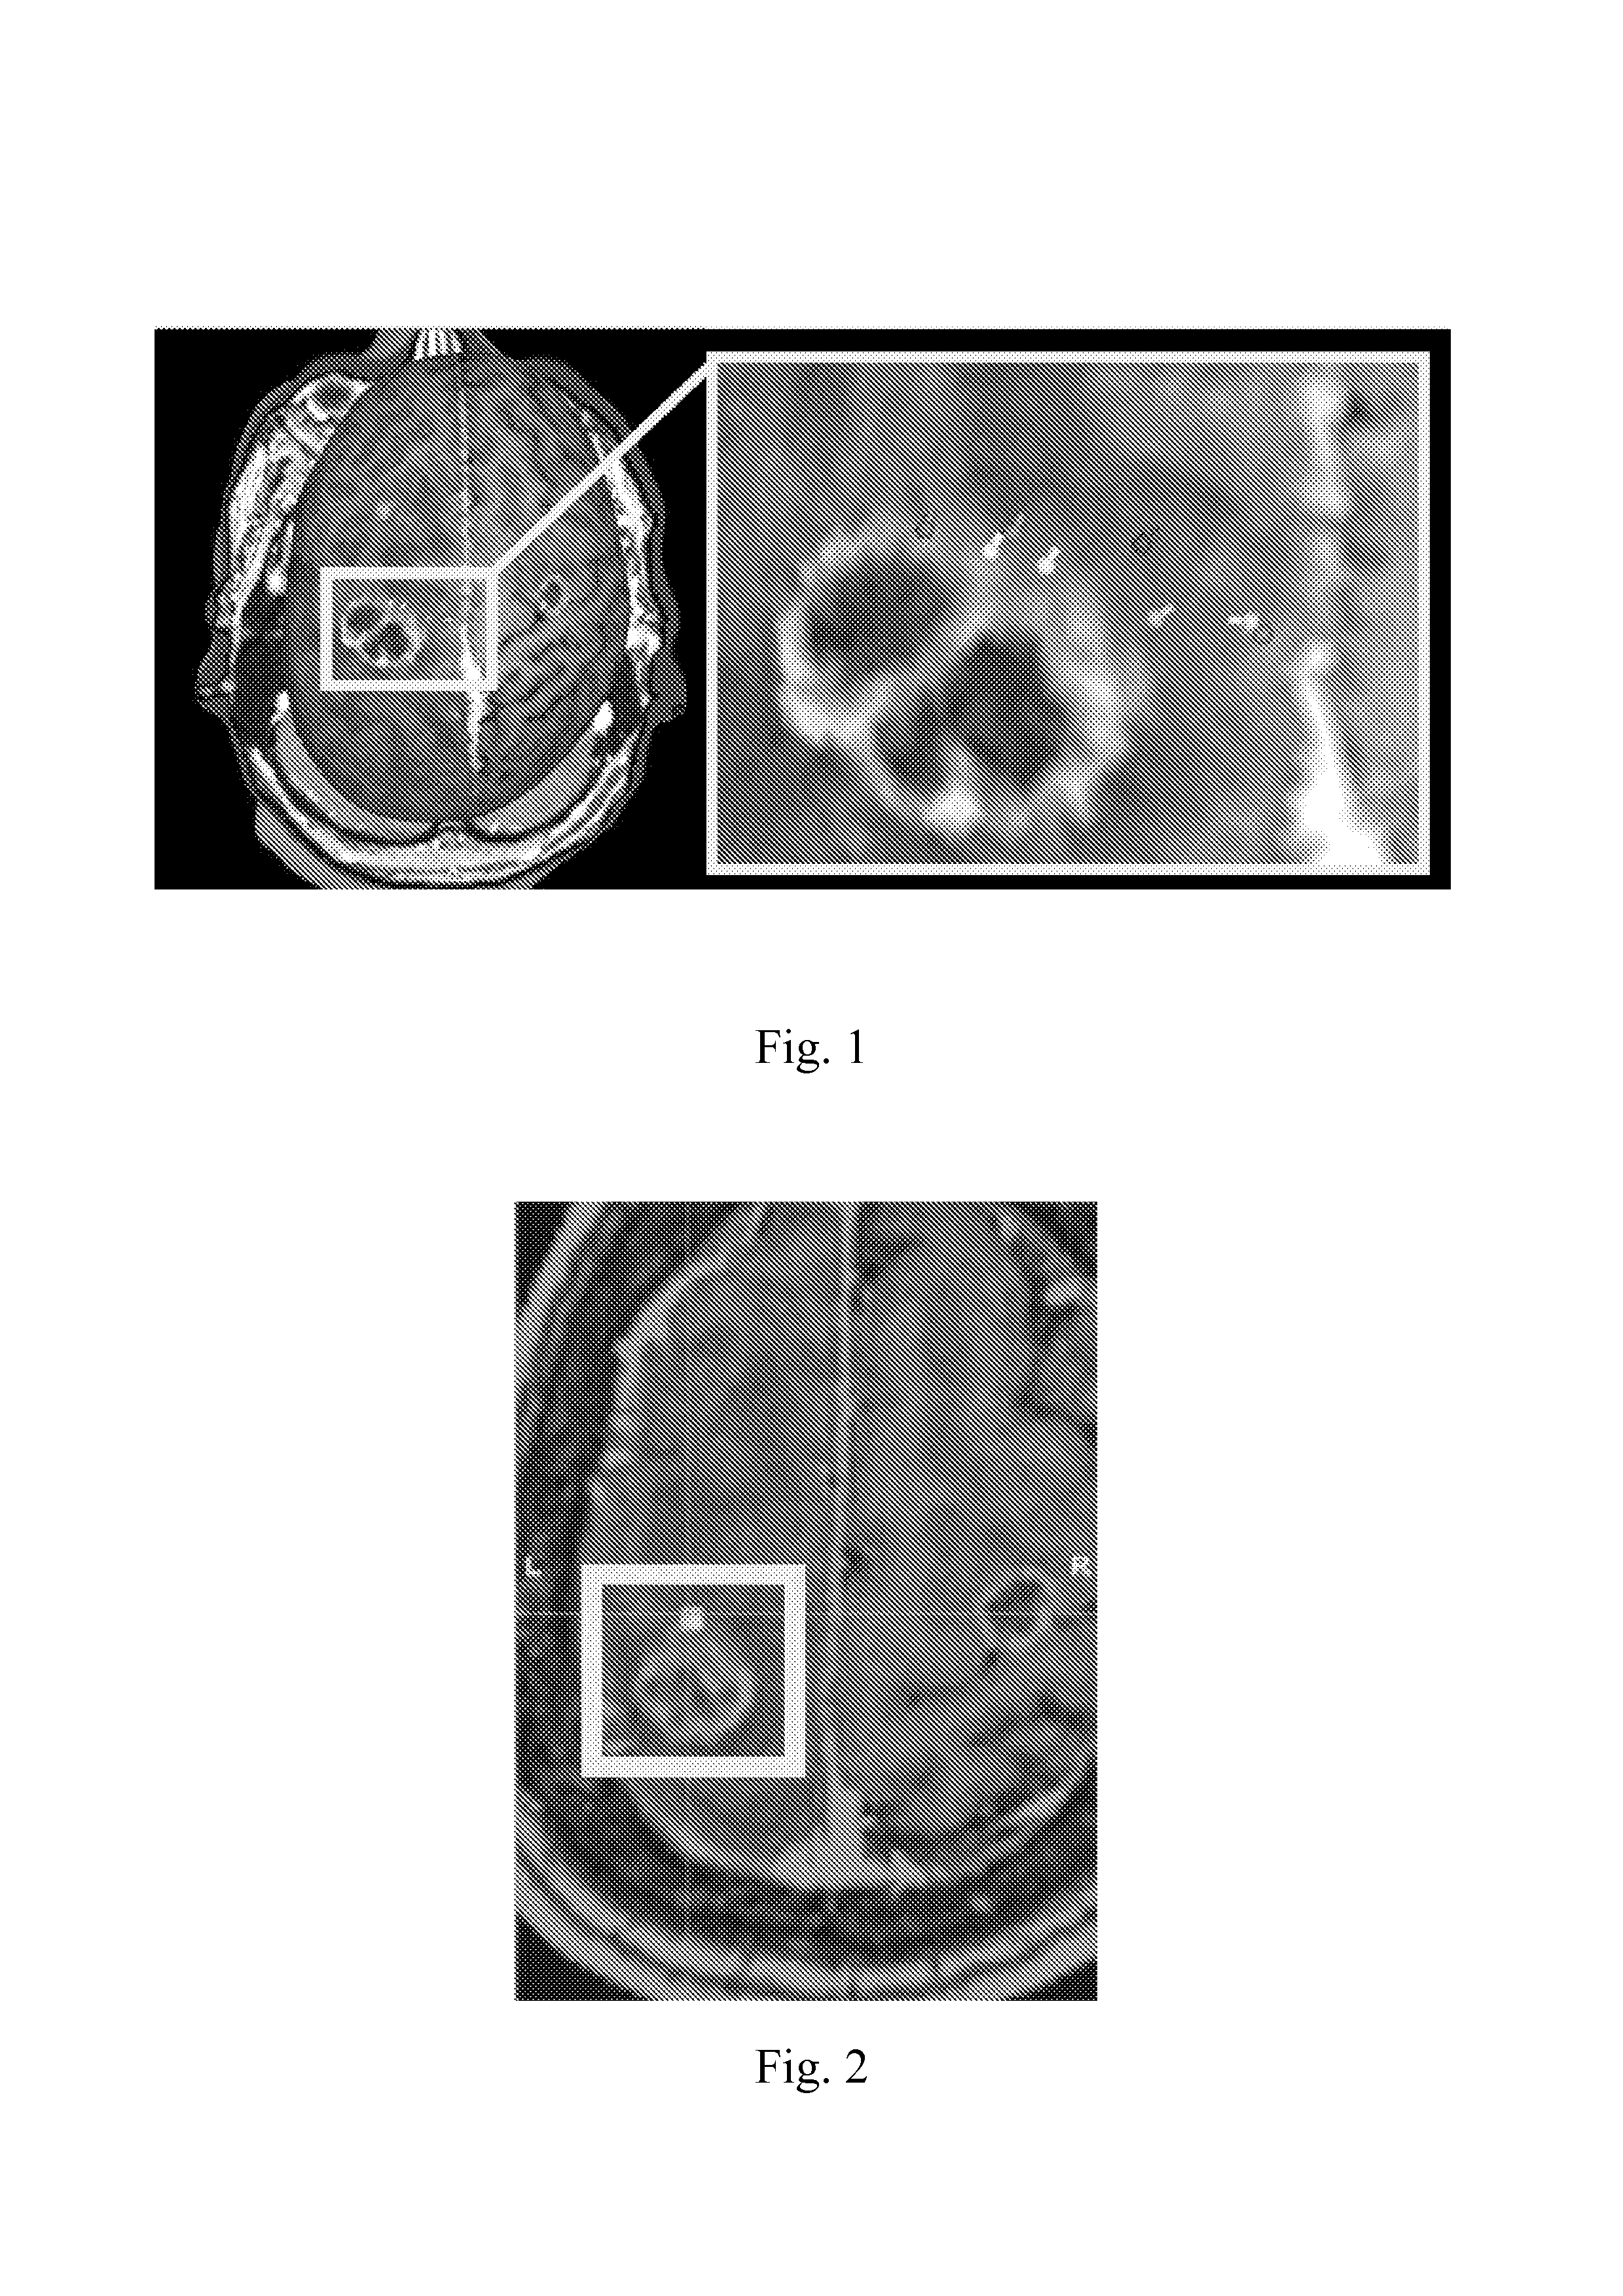 Method and system for combining anatomical connectivity patterns and navigated brain stimulation